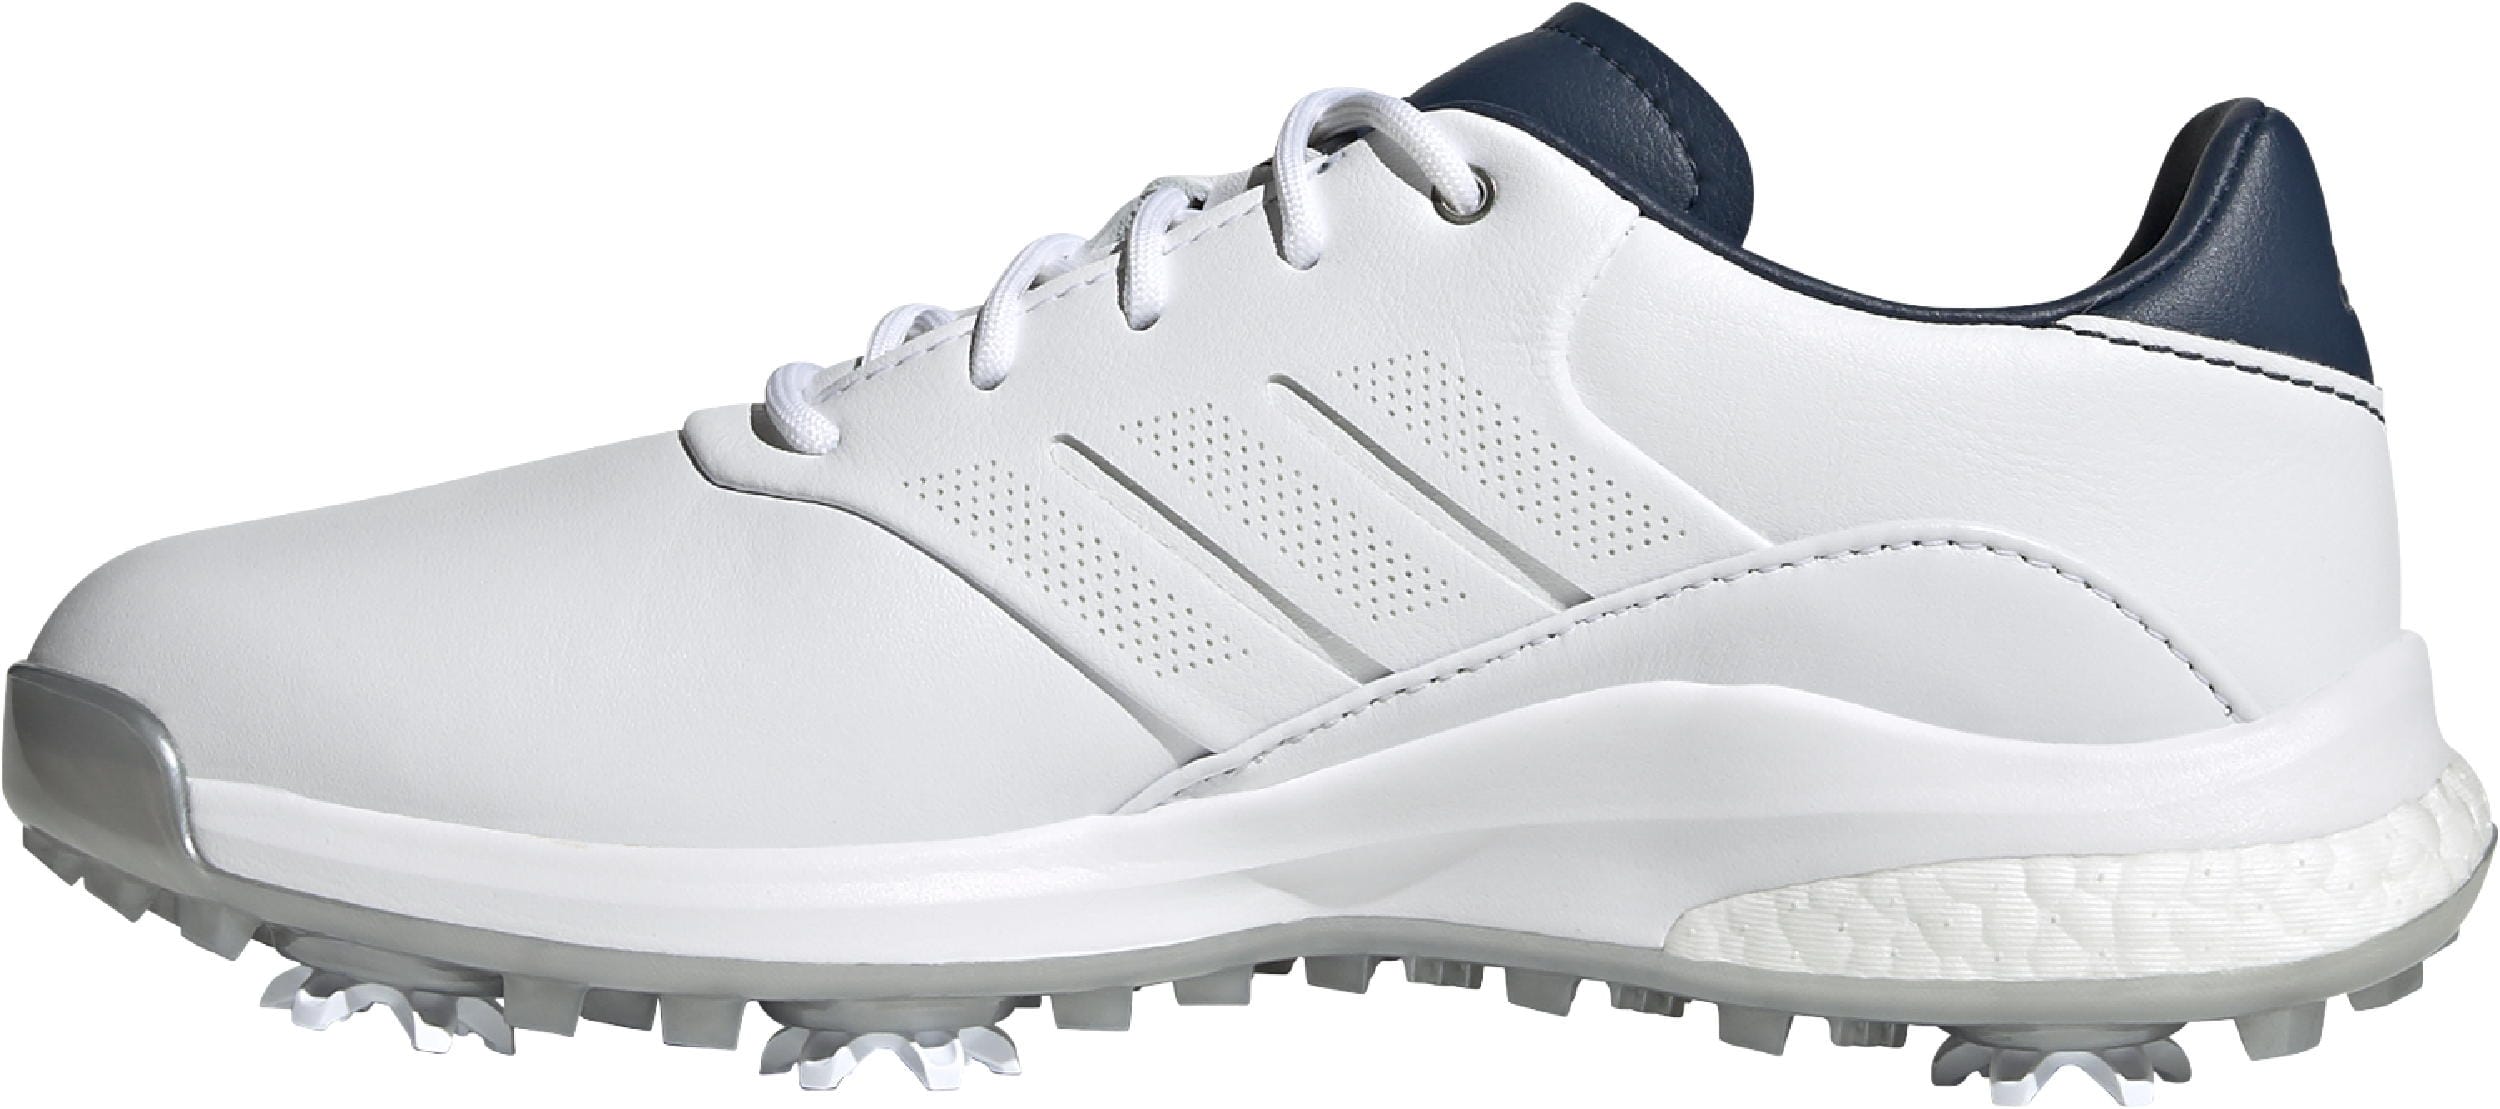 adidas Performance Classic, white/silver/navy